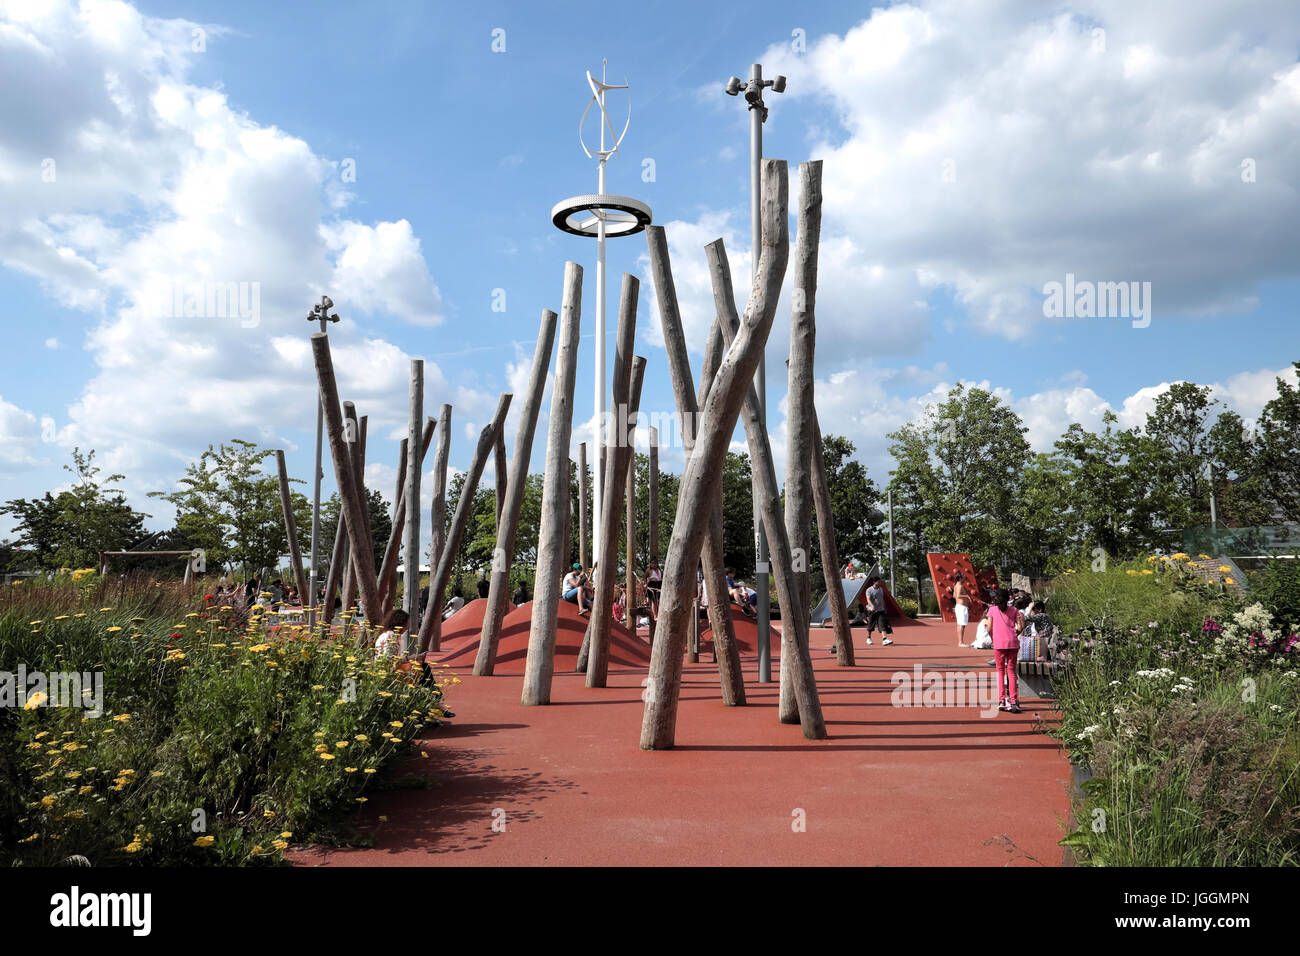 Childrens playground with pole structure & kids playing outside in the Queen Elizabeth Olympic Park in Stratford, East London England UK  KATHY DEWITT Stock Photo